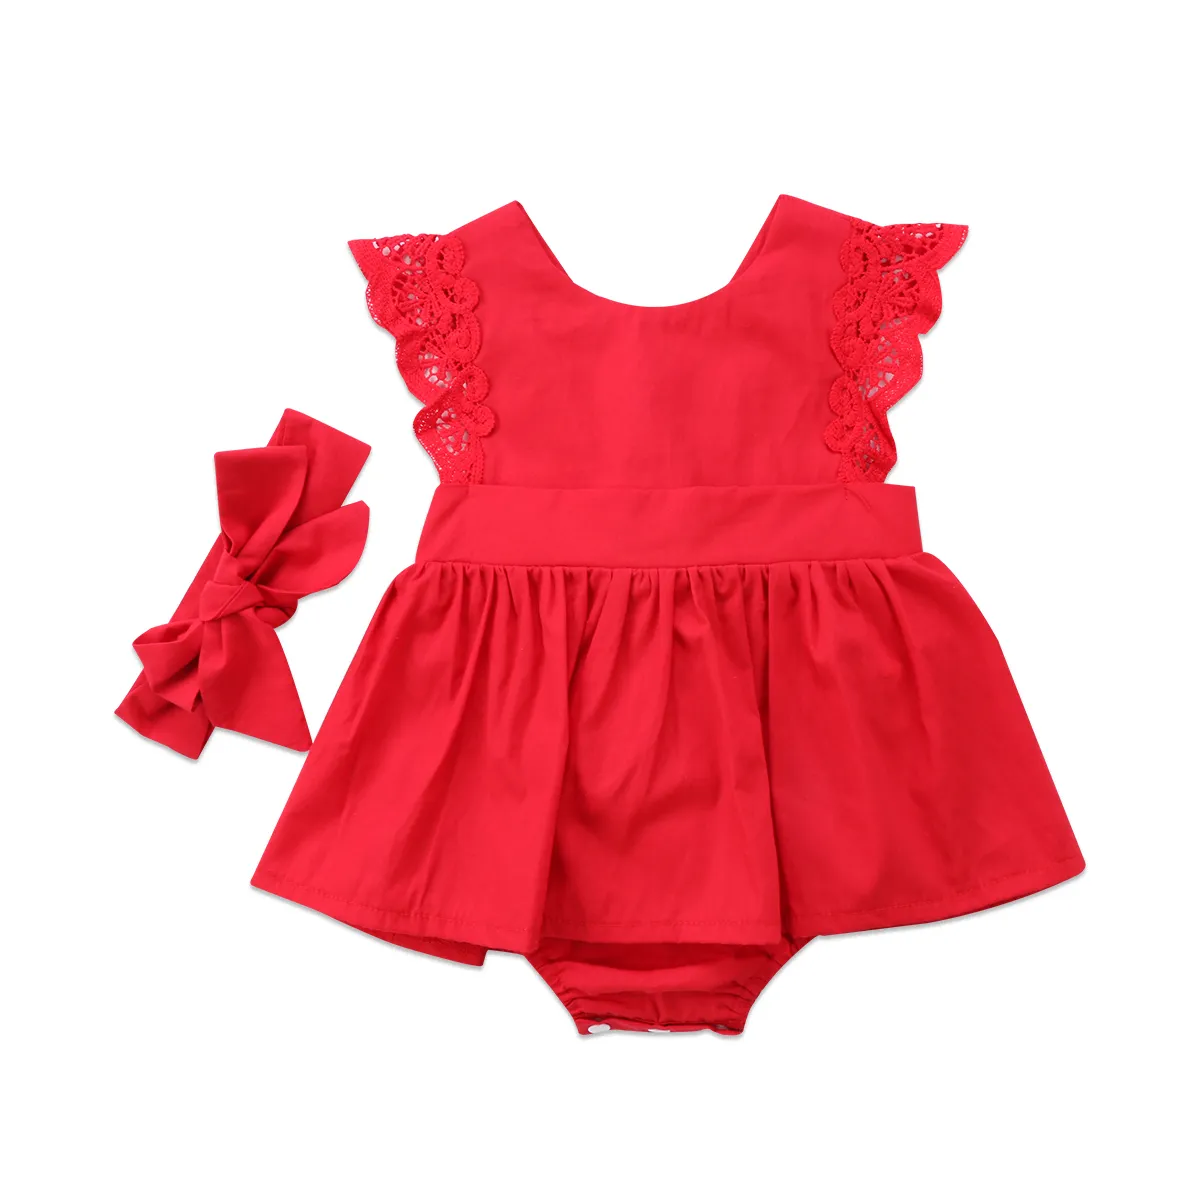 New ArriaVL Christmas Ruffle Red Lace Romper Klänning Baby Girls Syster Princess Kids Xmas Party Dresses Bomull nyfödd kostym